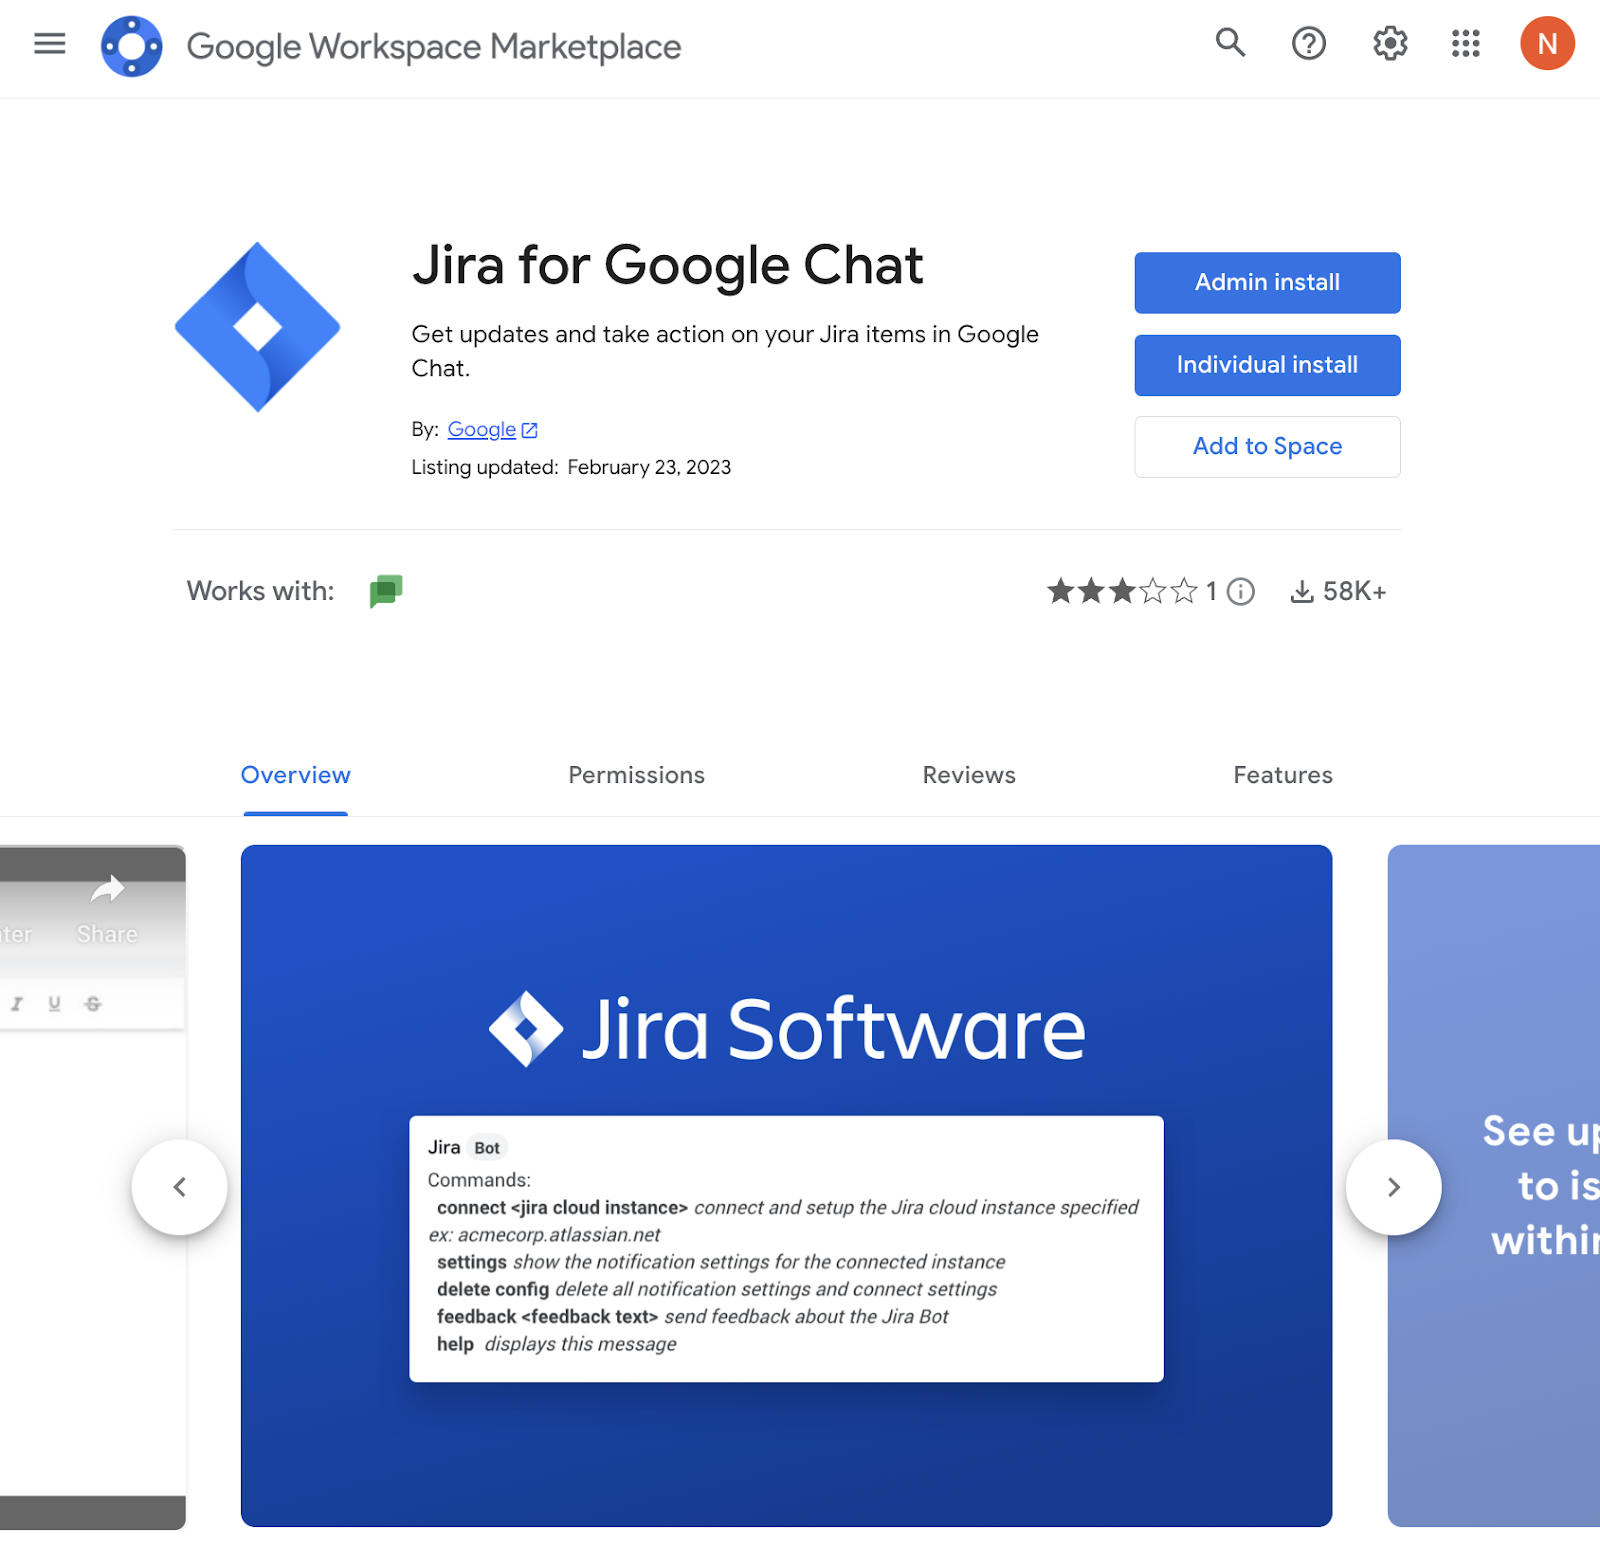 Jira for Google Chat